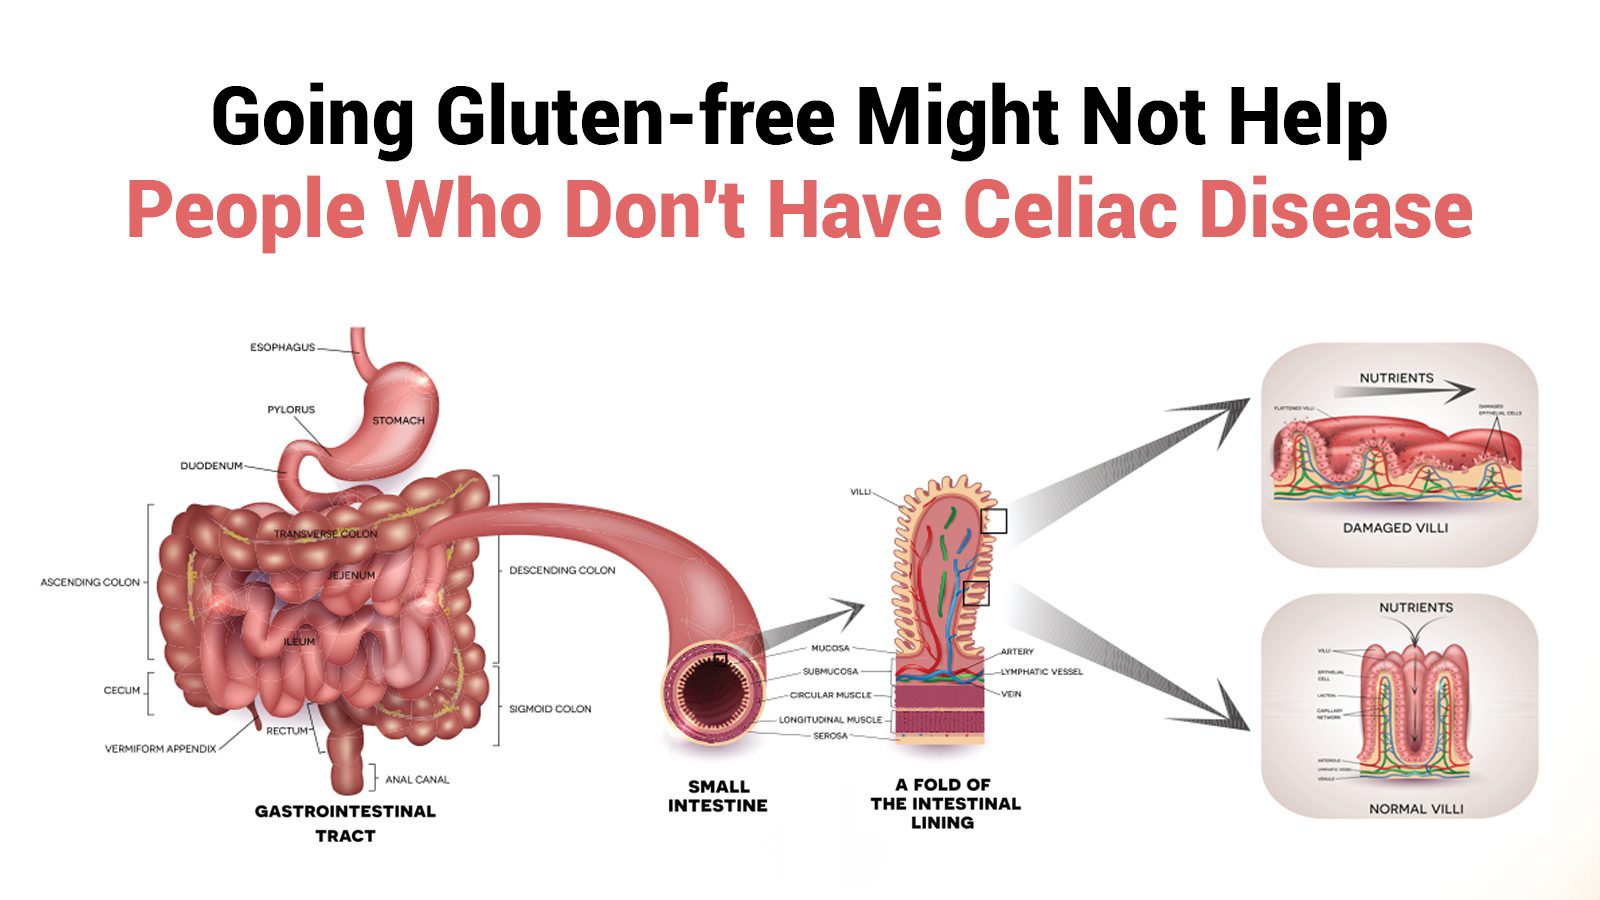 Going Gluten-free Might Not Help People Who Don’t Have Celiac Disease, Study Says